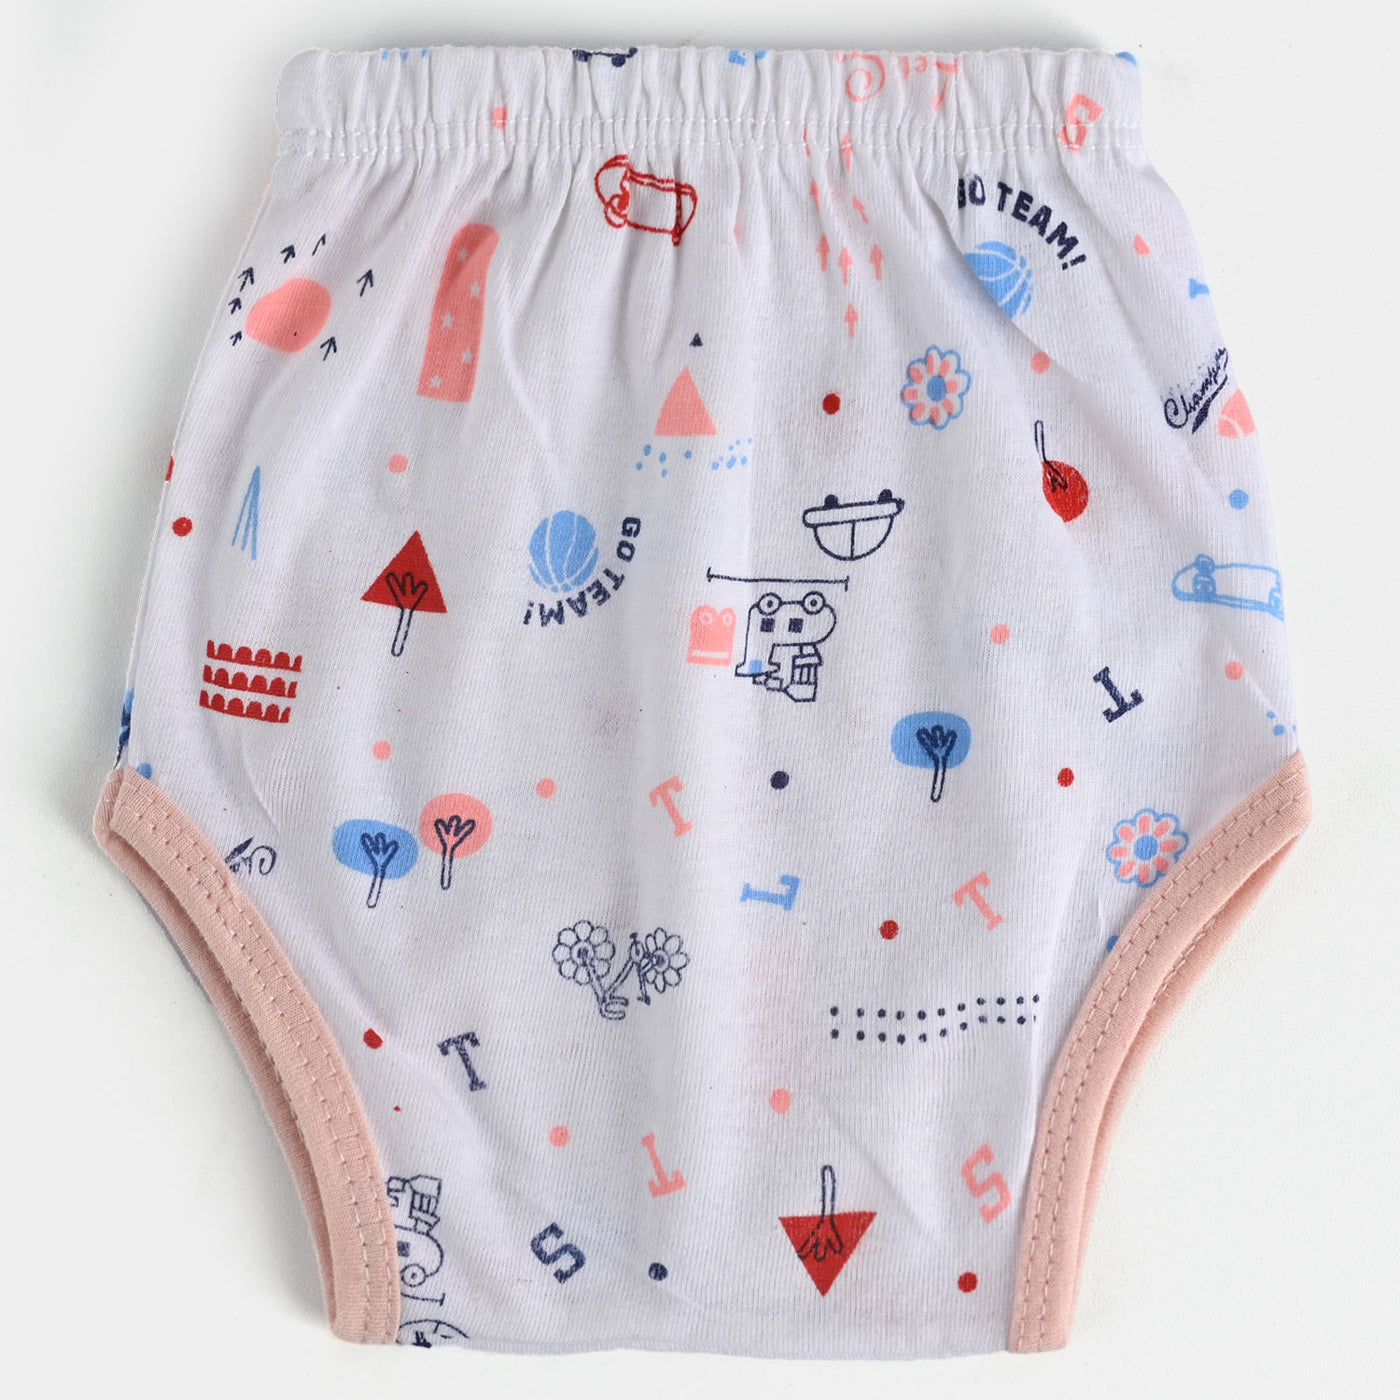 Pack OF 3 Infants Cotton Panty | 3-6Months